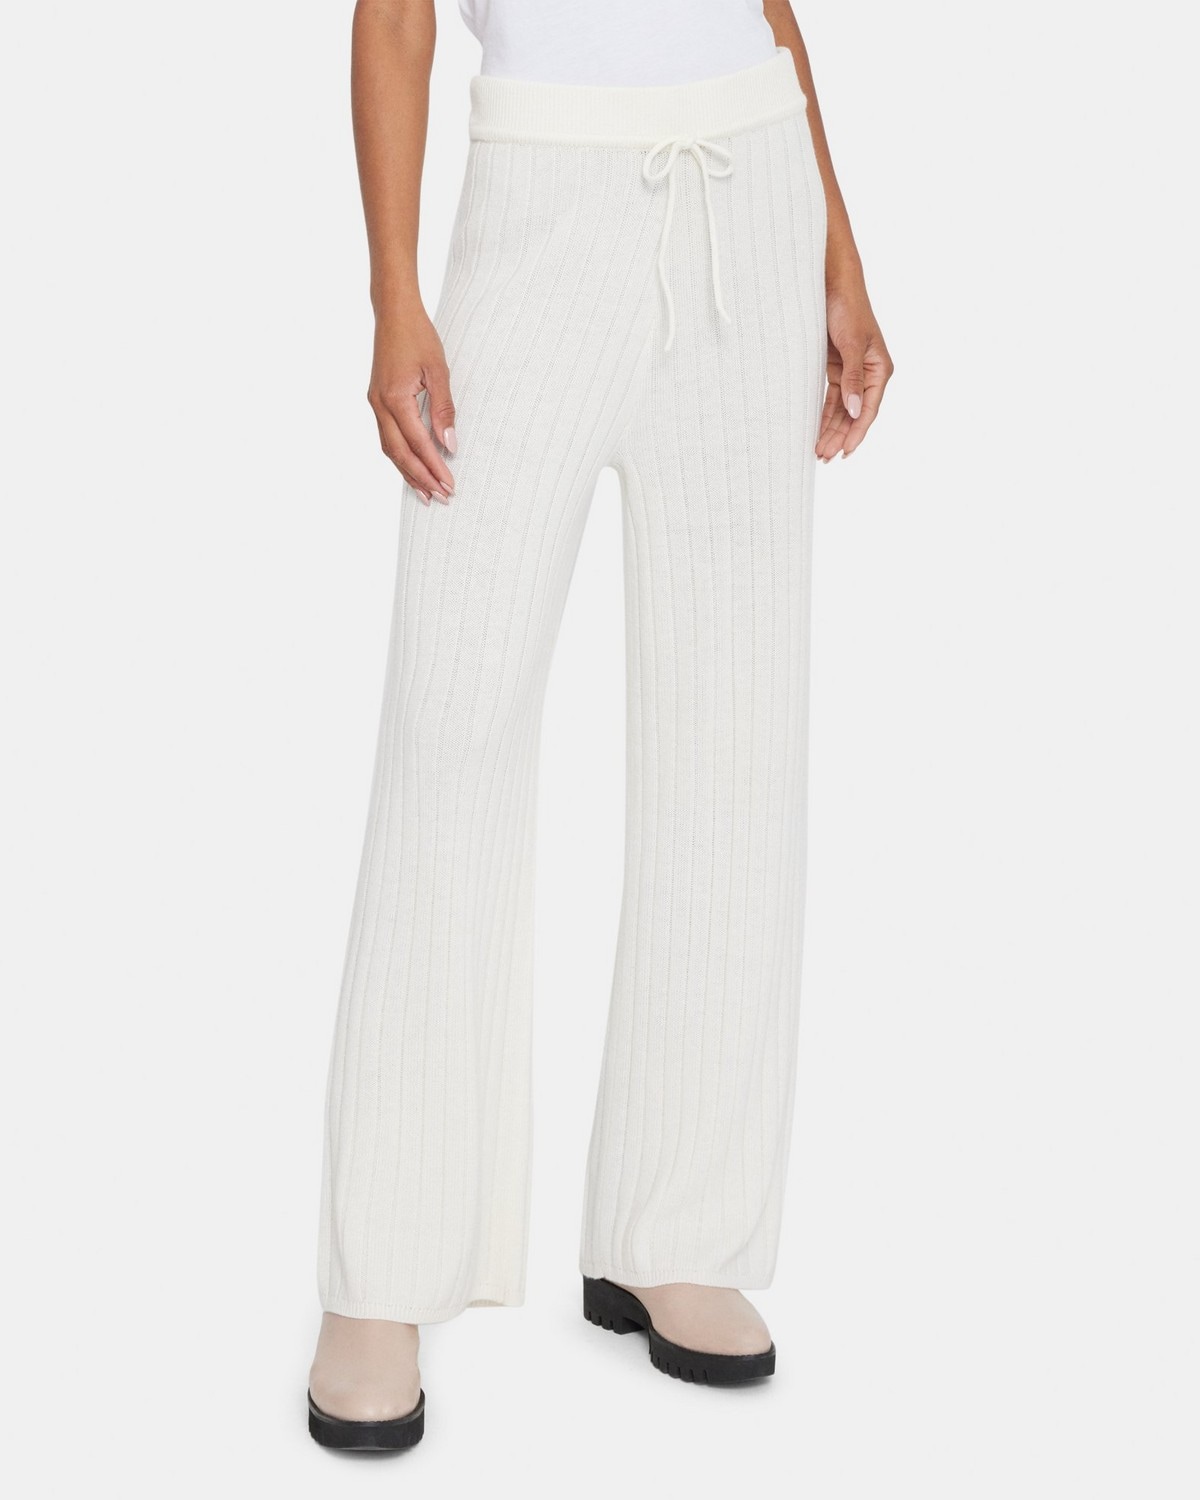 Easy Jogger Pant in Wool-Cashmere